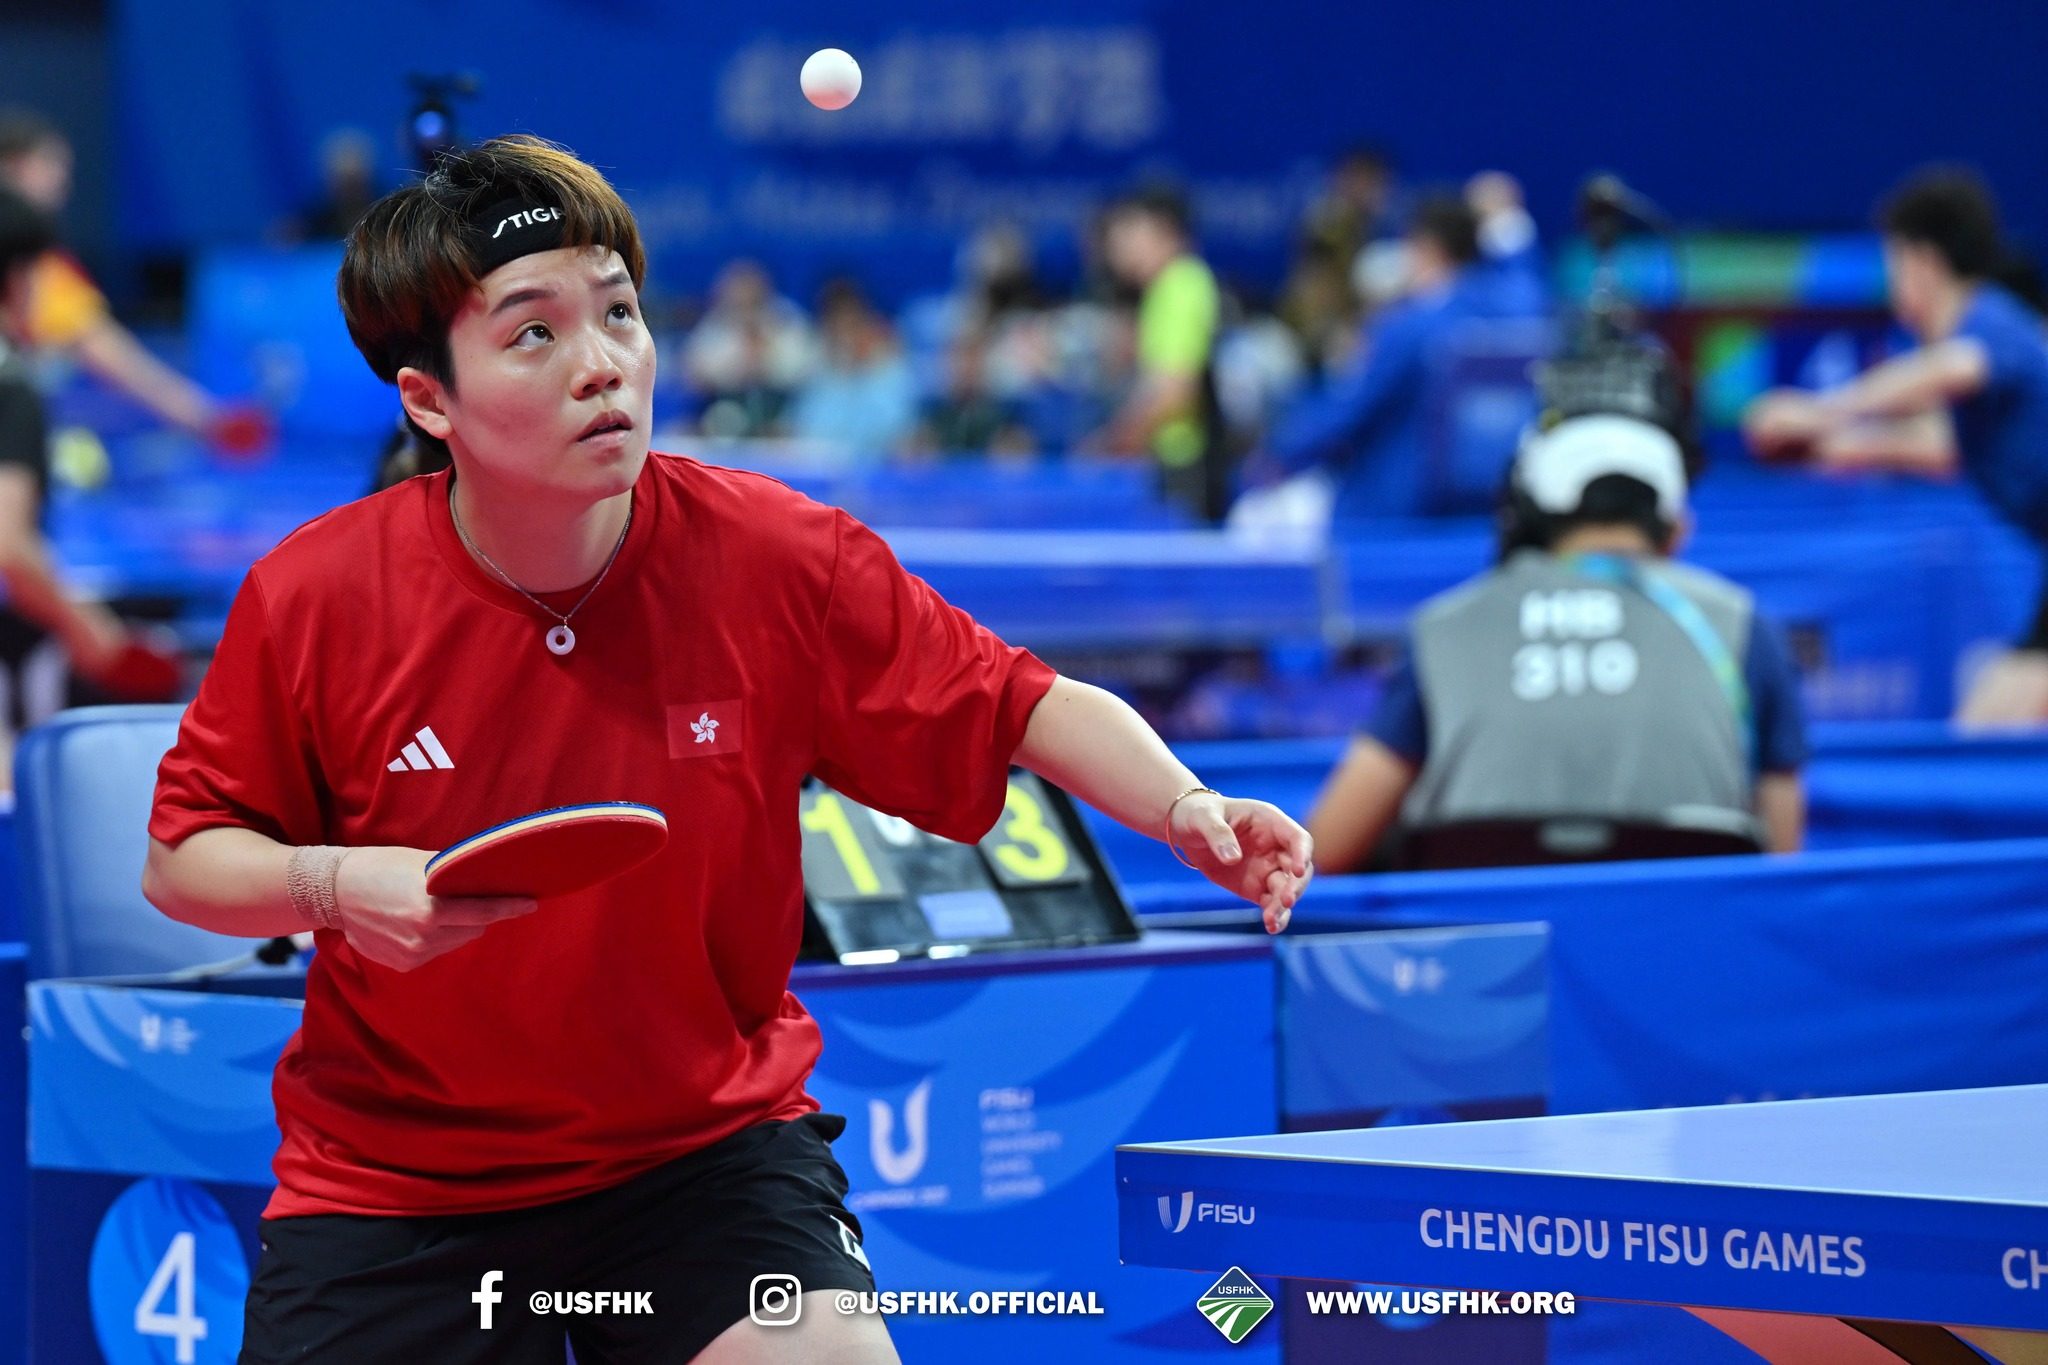 World University Games new medal record for Hong Kong after table tennis bronze in Chengdu South China Morning Post